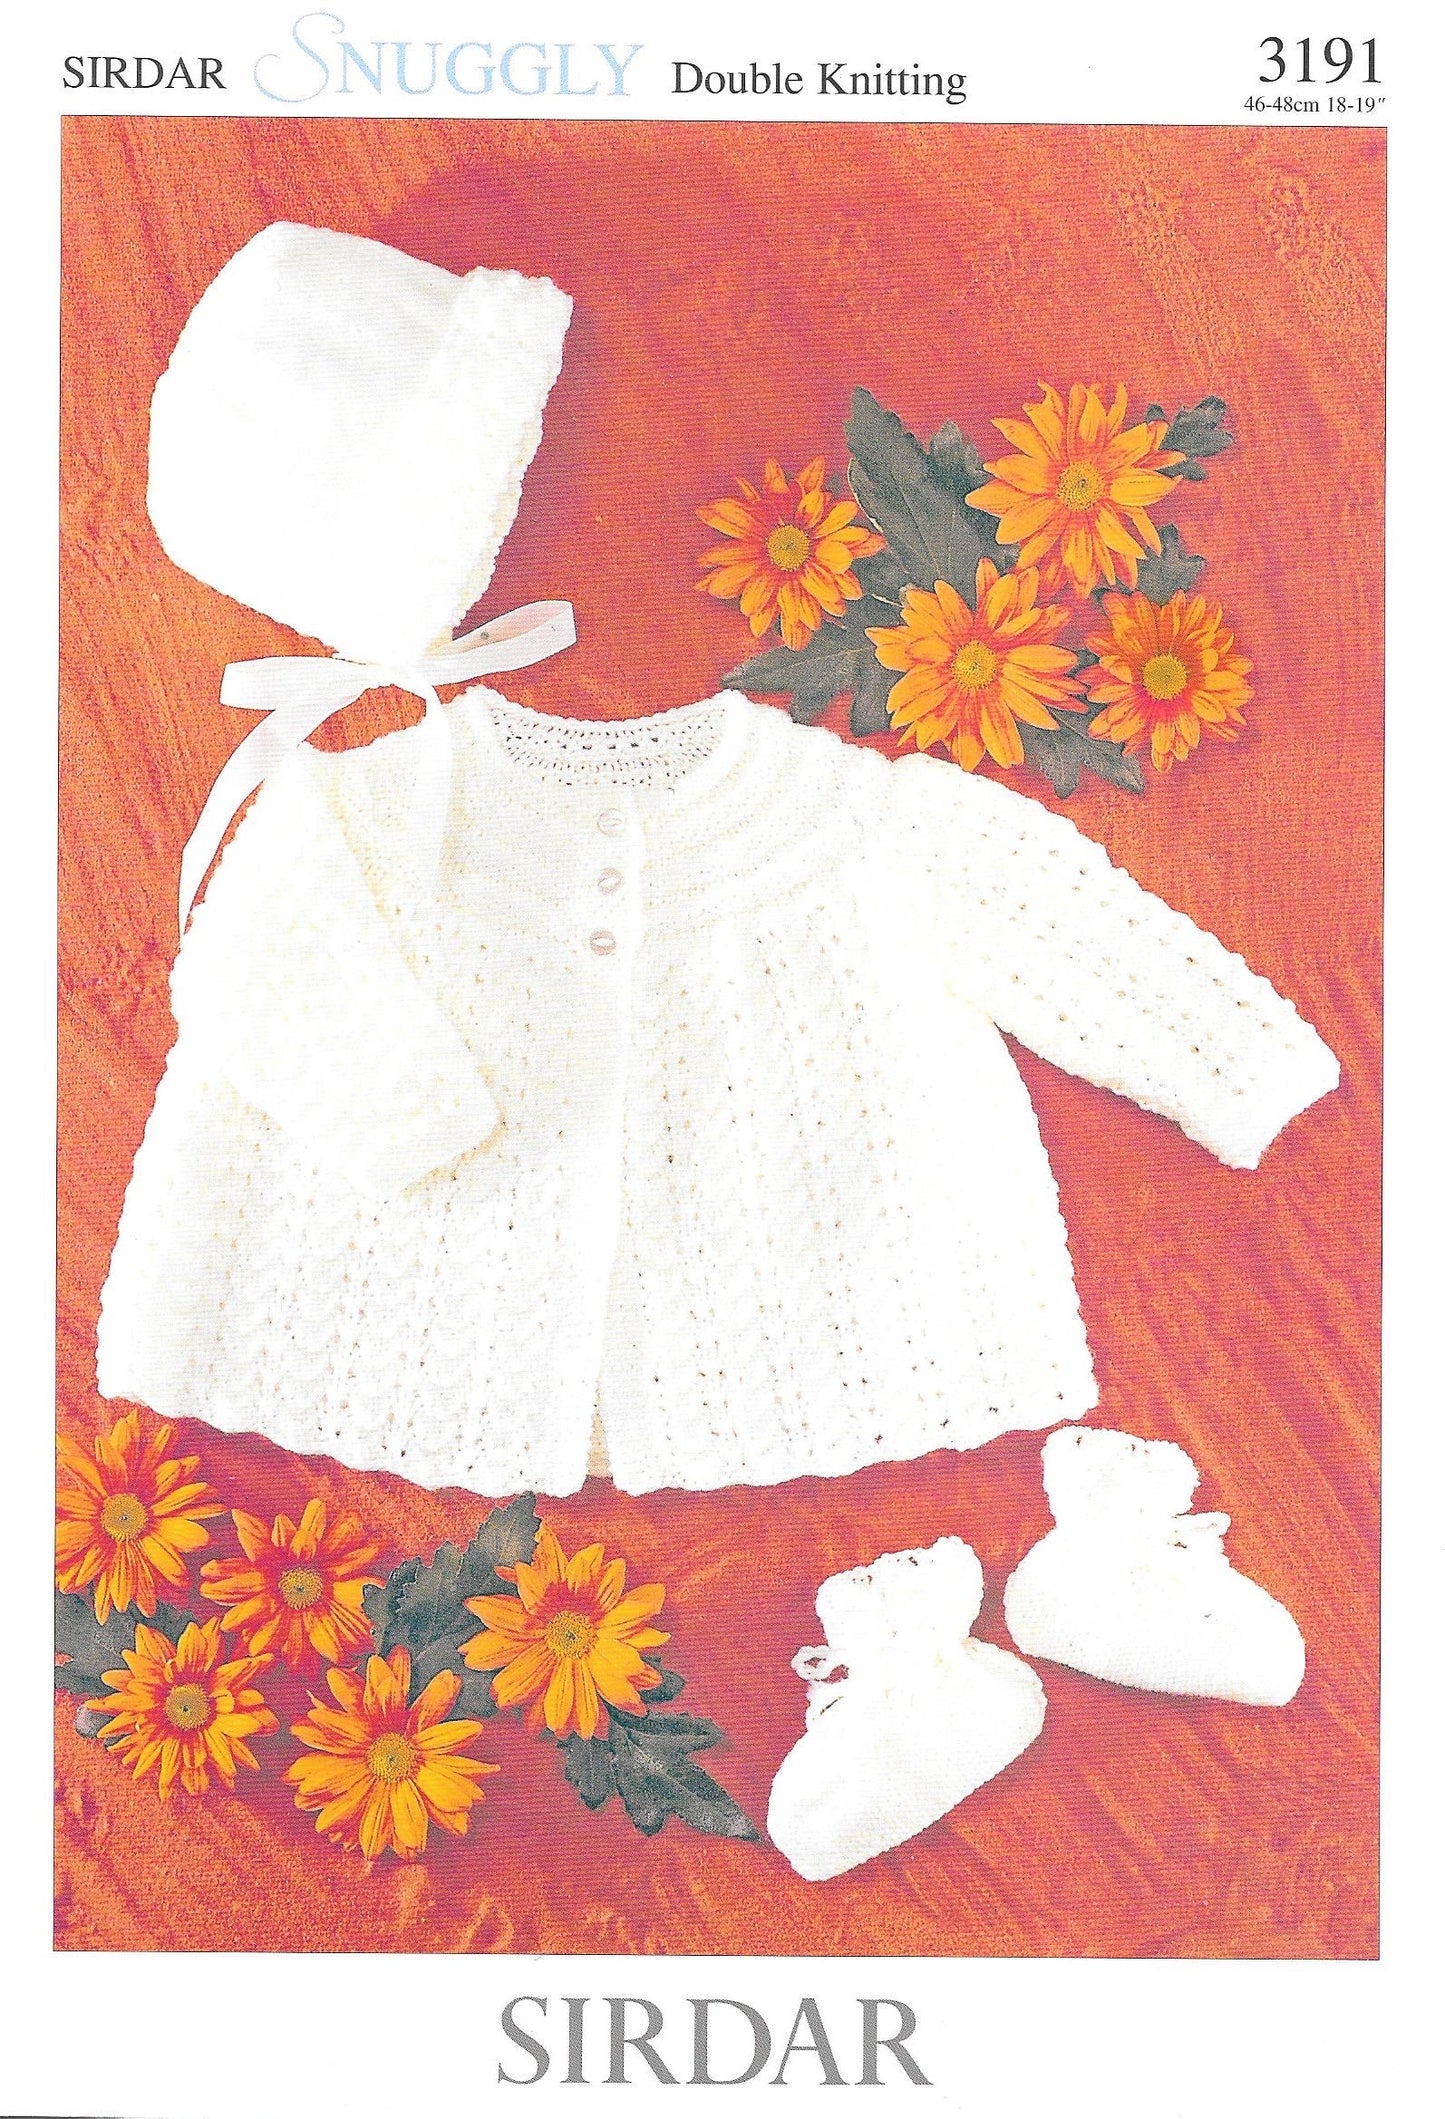 3191 Sirdar Snuggly Dk Baby Matinee Jacket, Bonnet and Bootees Knitting Pattern